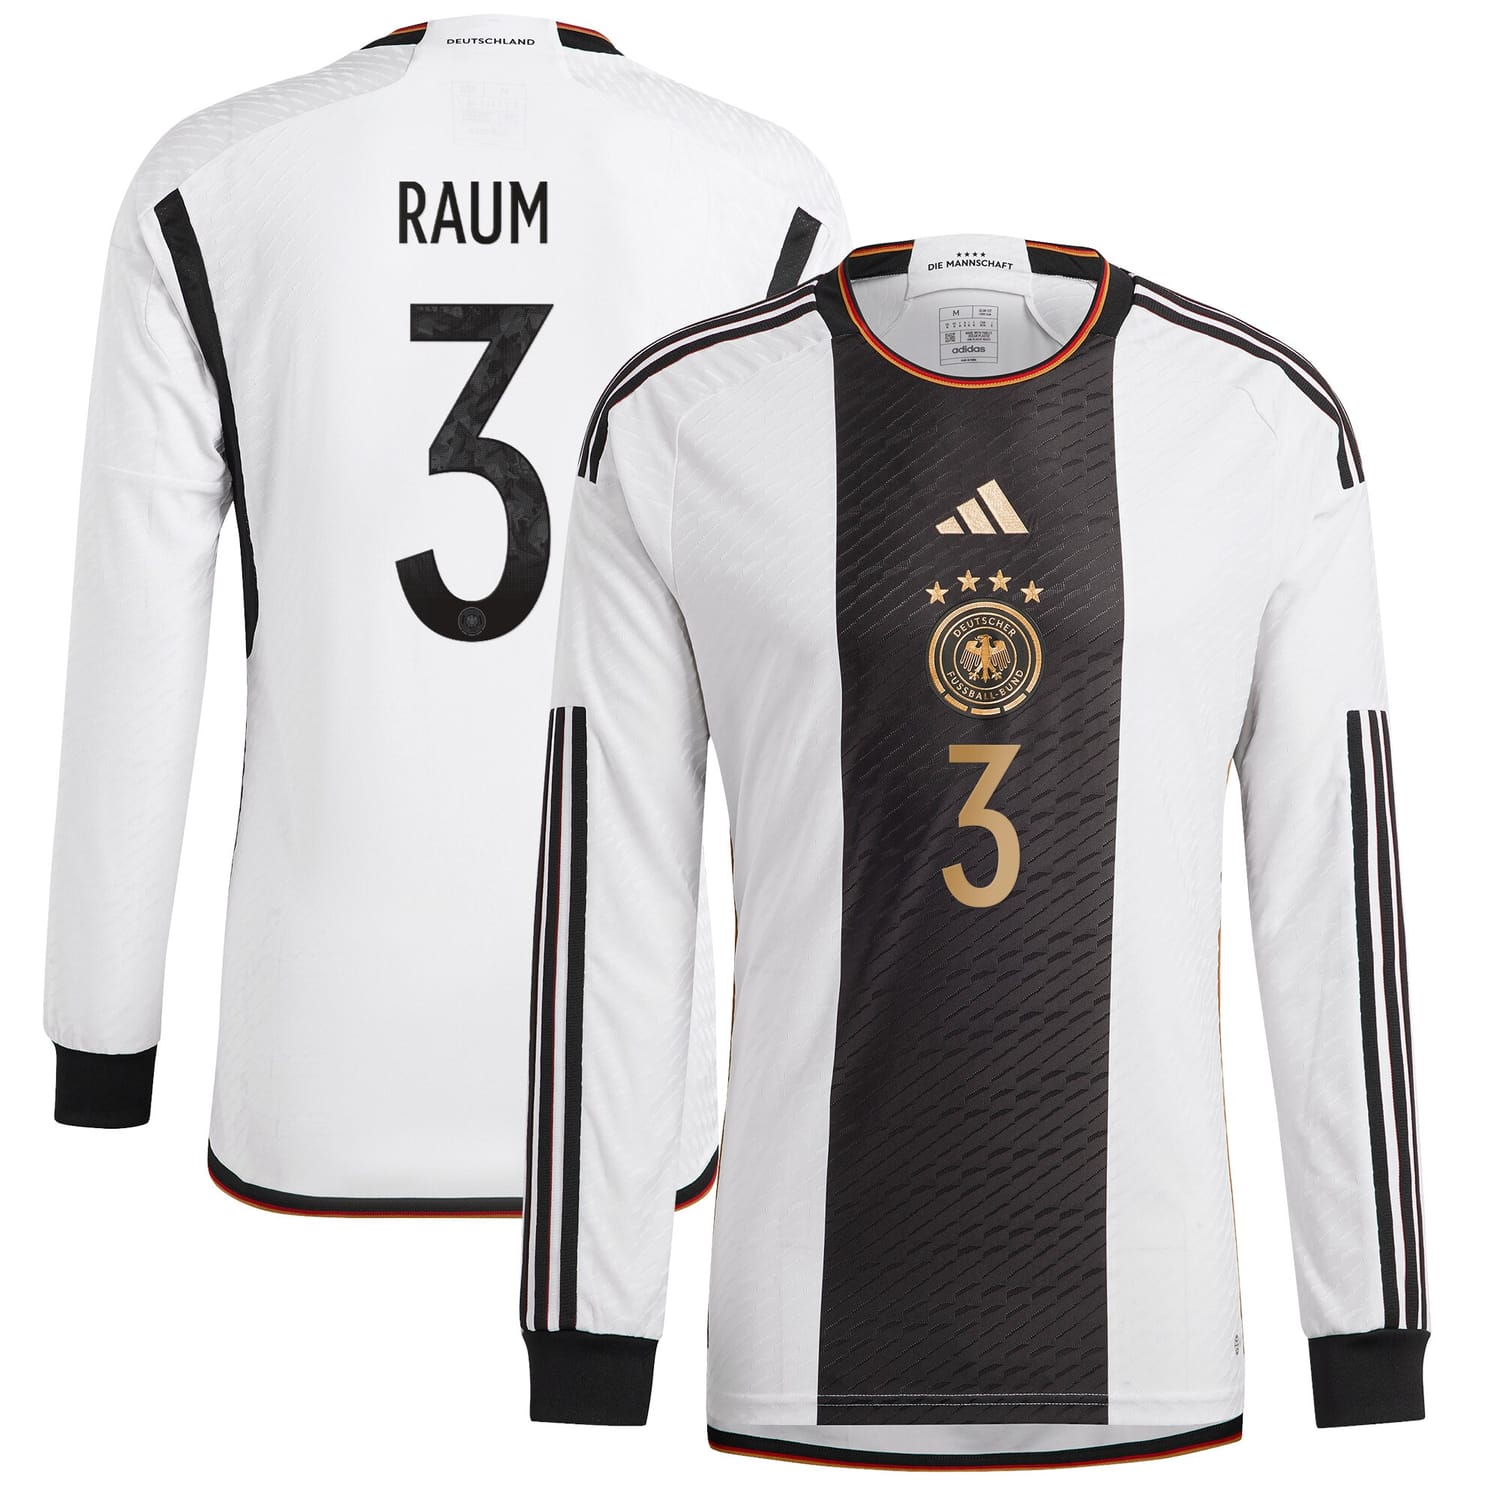 Germany National Team Home Authentic Jersey Shirt Long Sleeve player David Raum 3 printing for Men